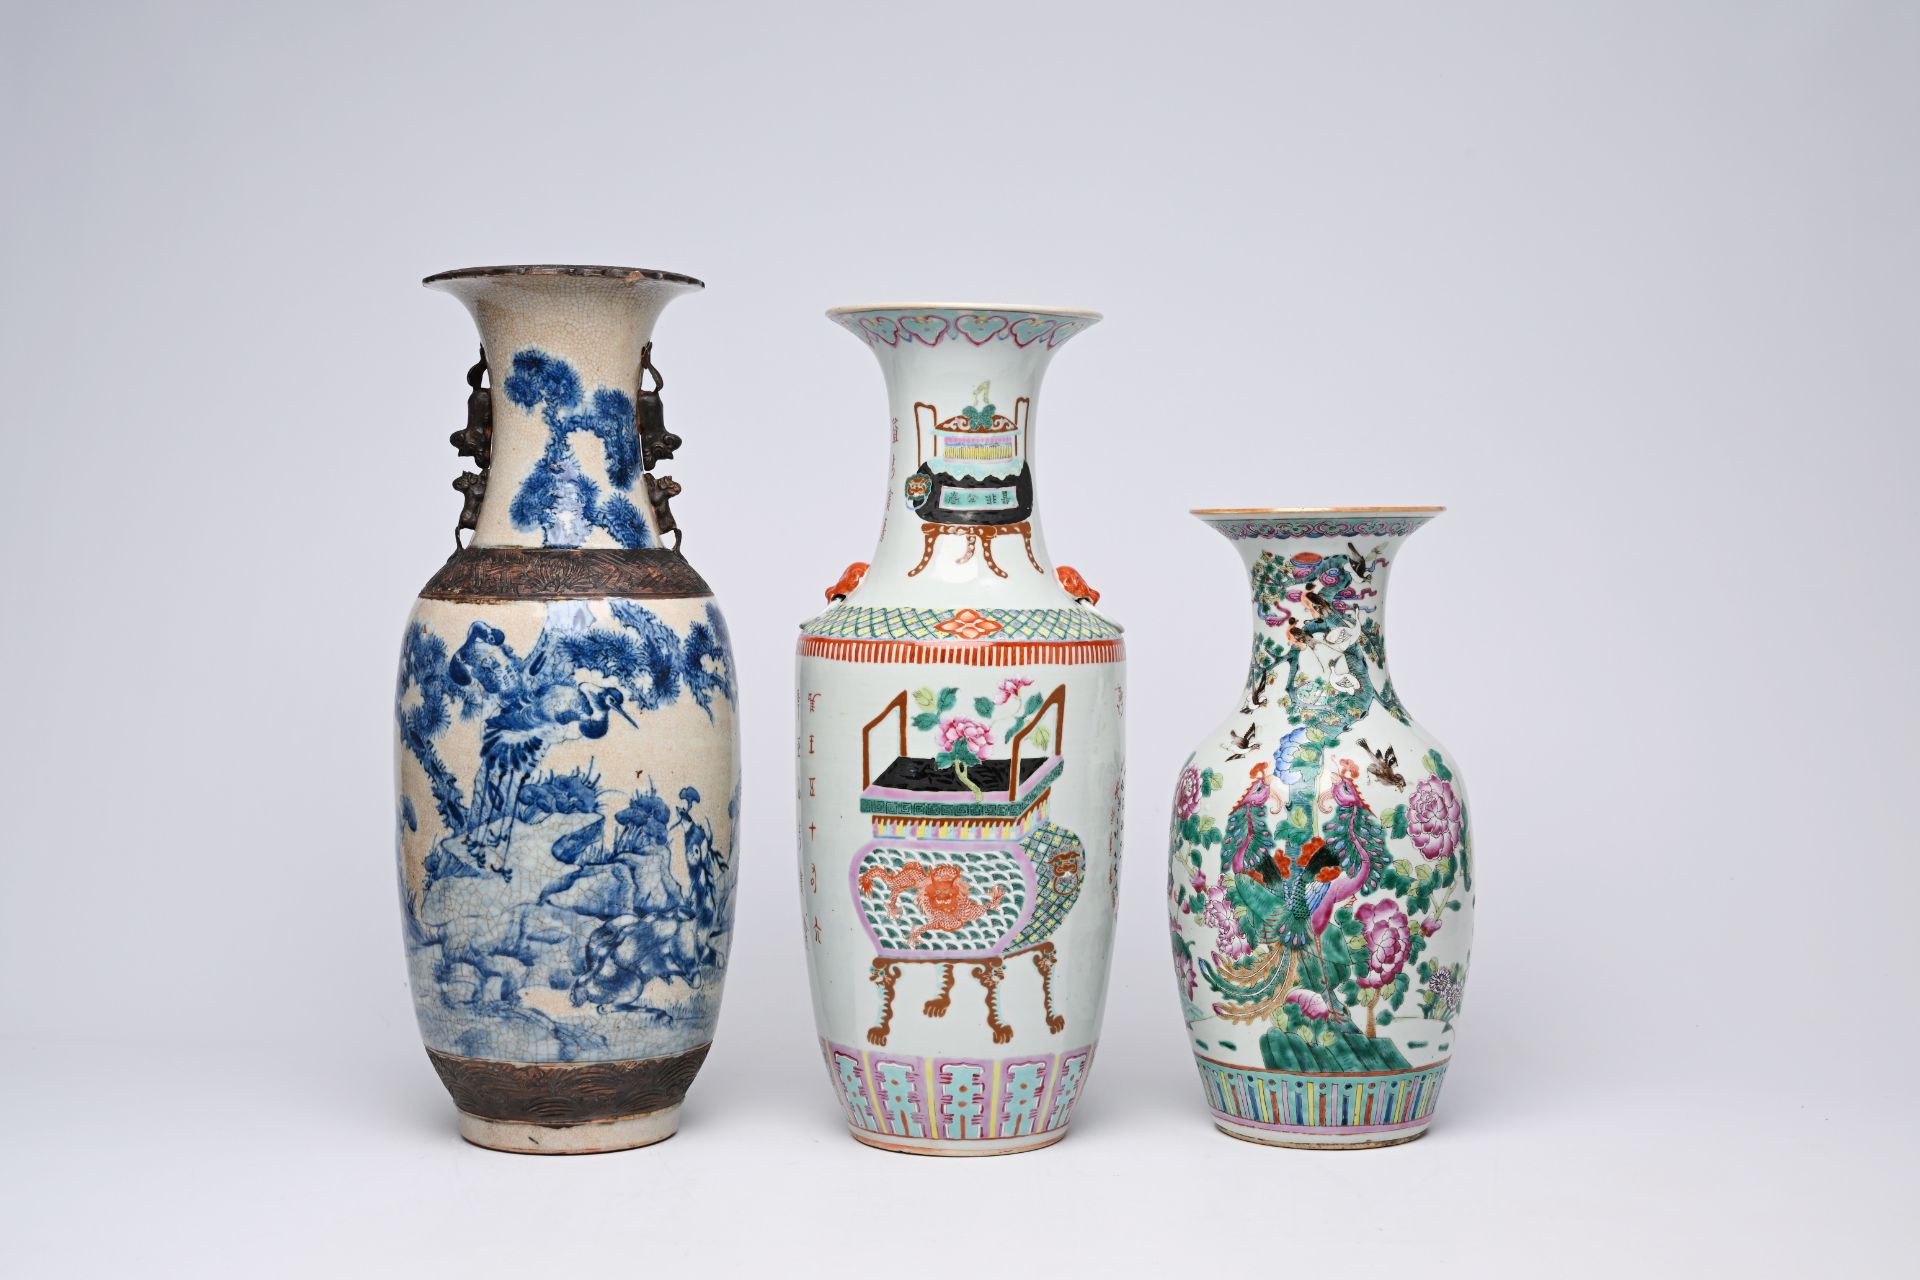 Two various Chinese famille rose vases and a Nanking crackle glazed blue and white vase with cranes